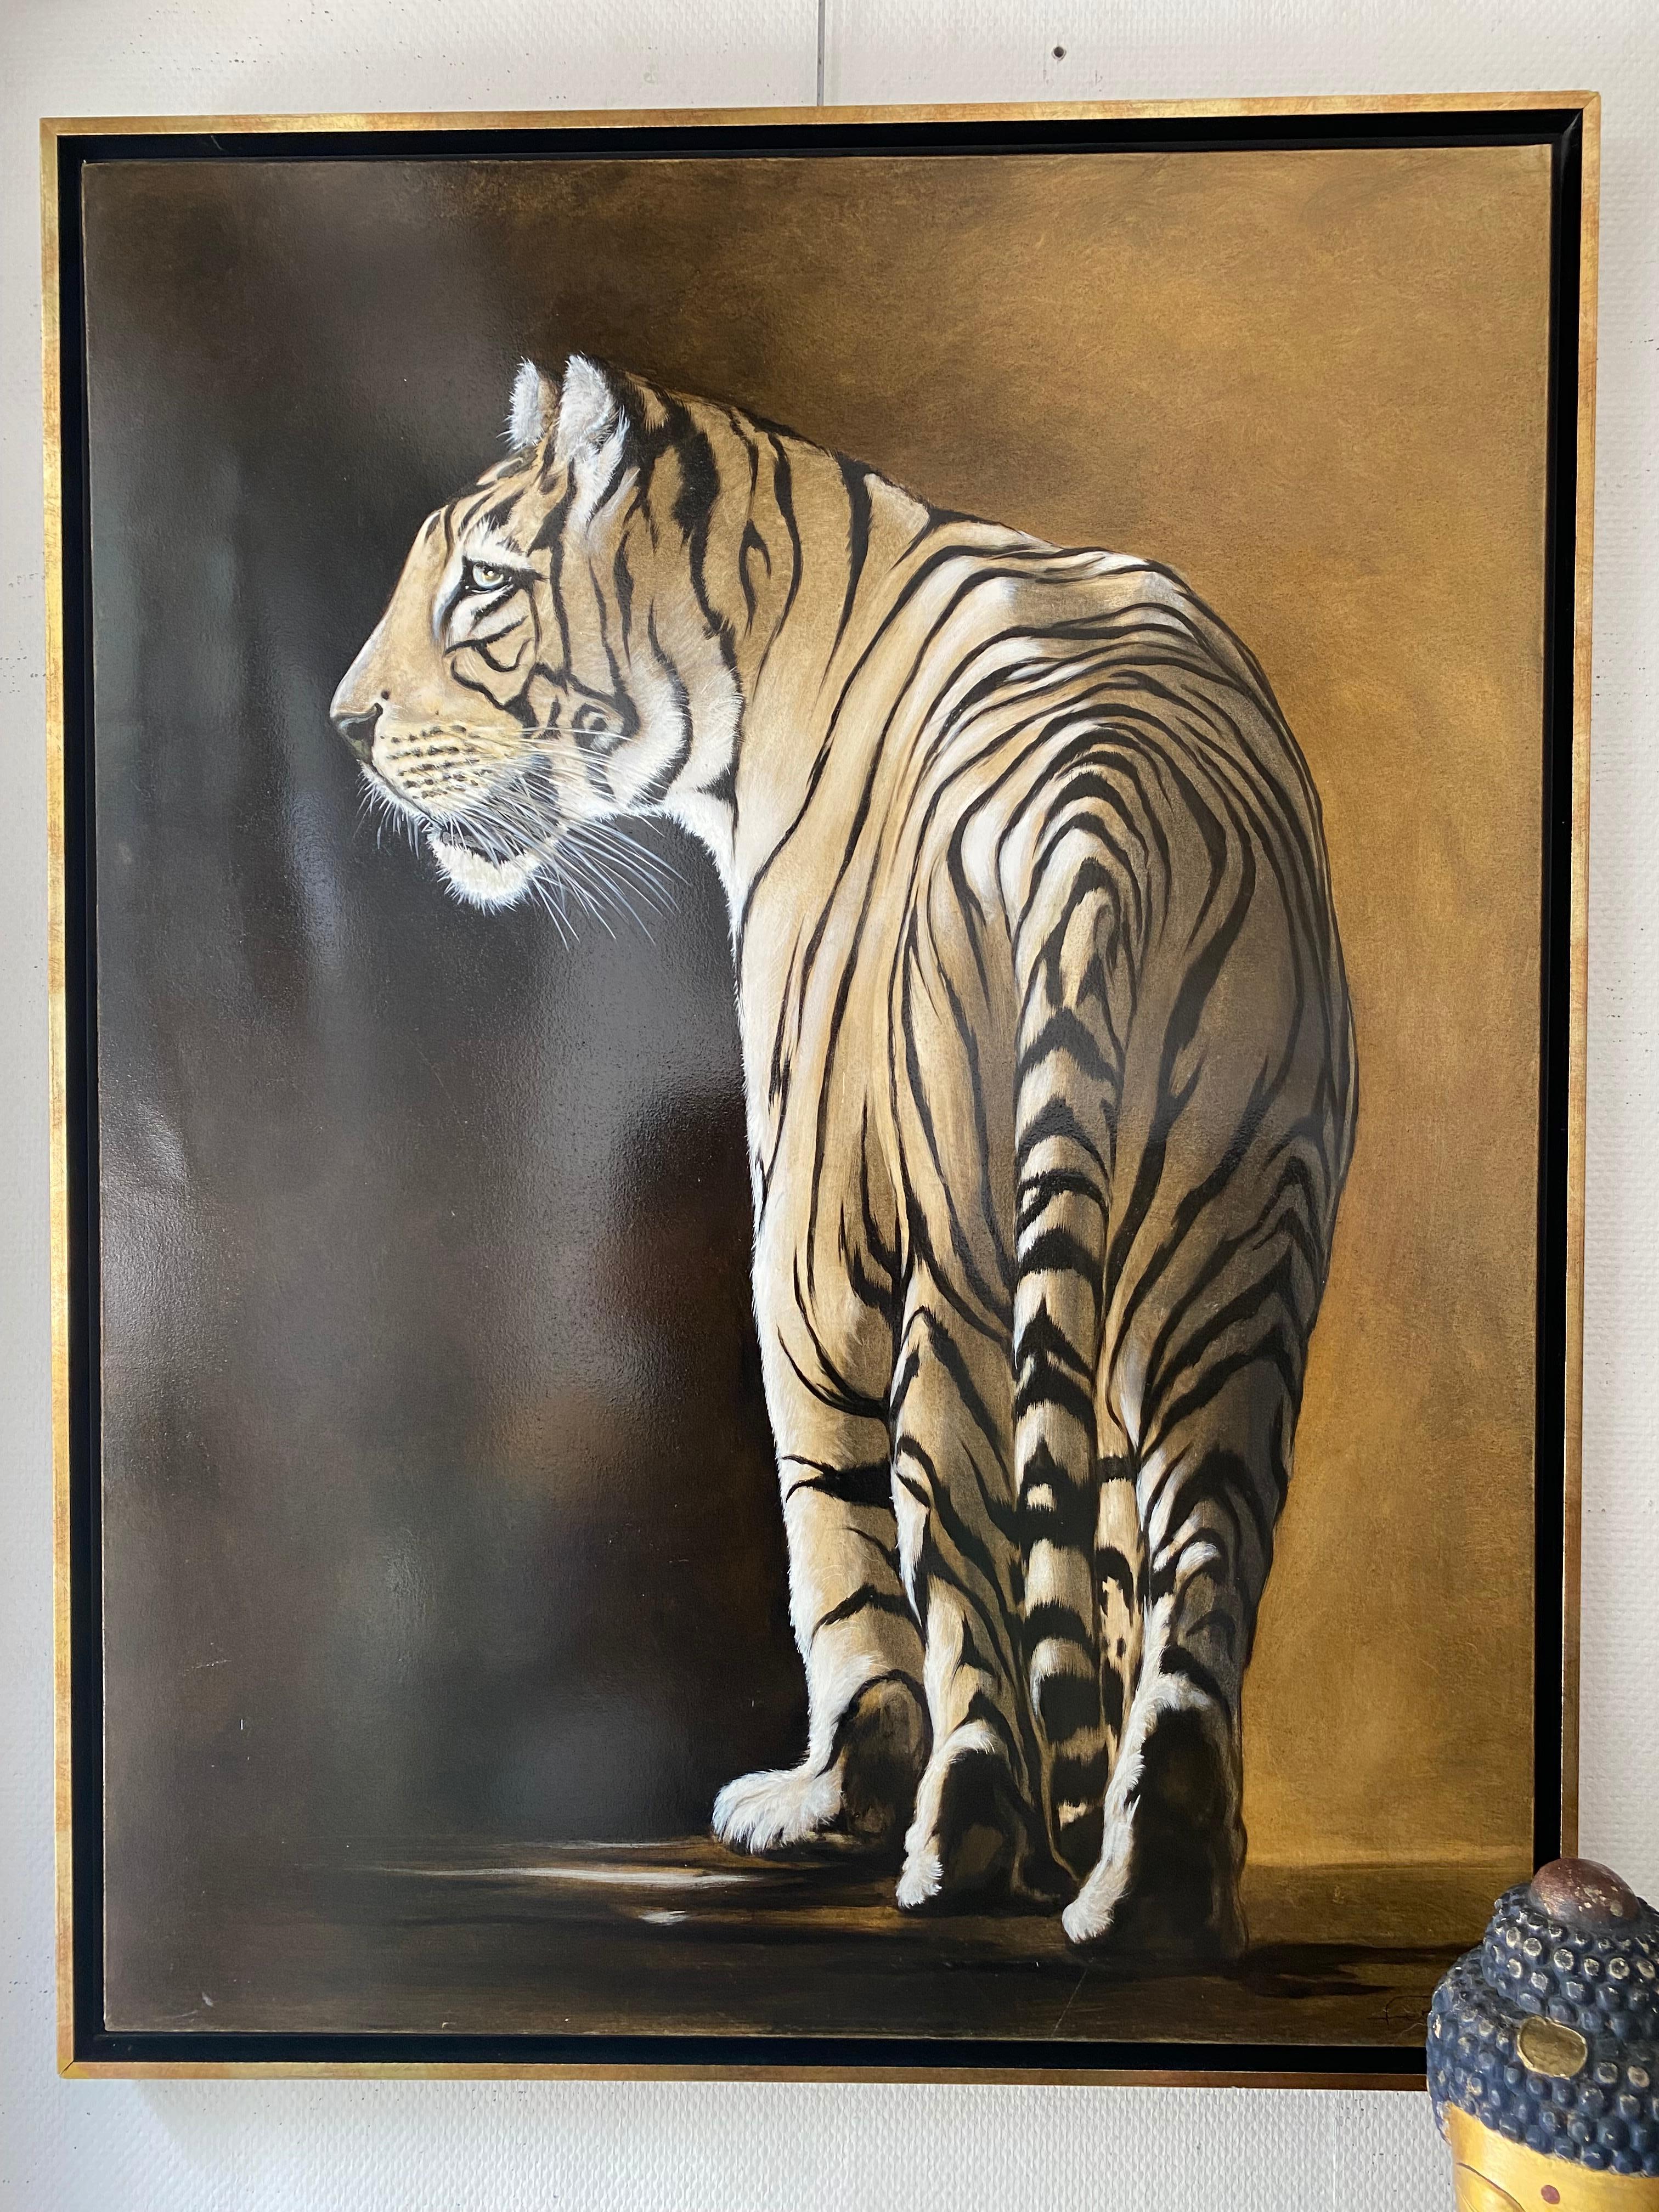 Animal Painting André Ferrand - Andr Ferrand - Le tigre